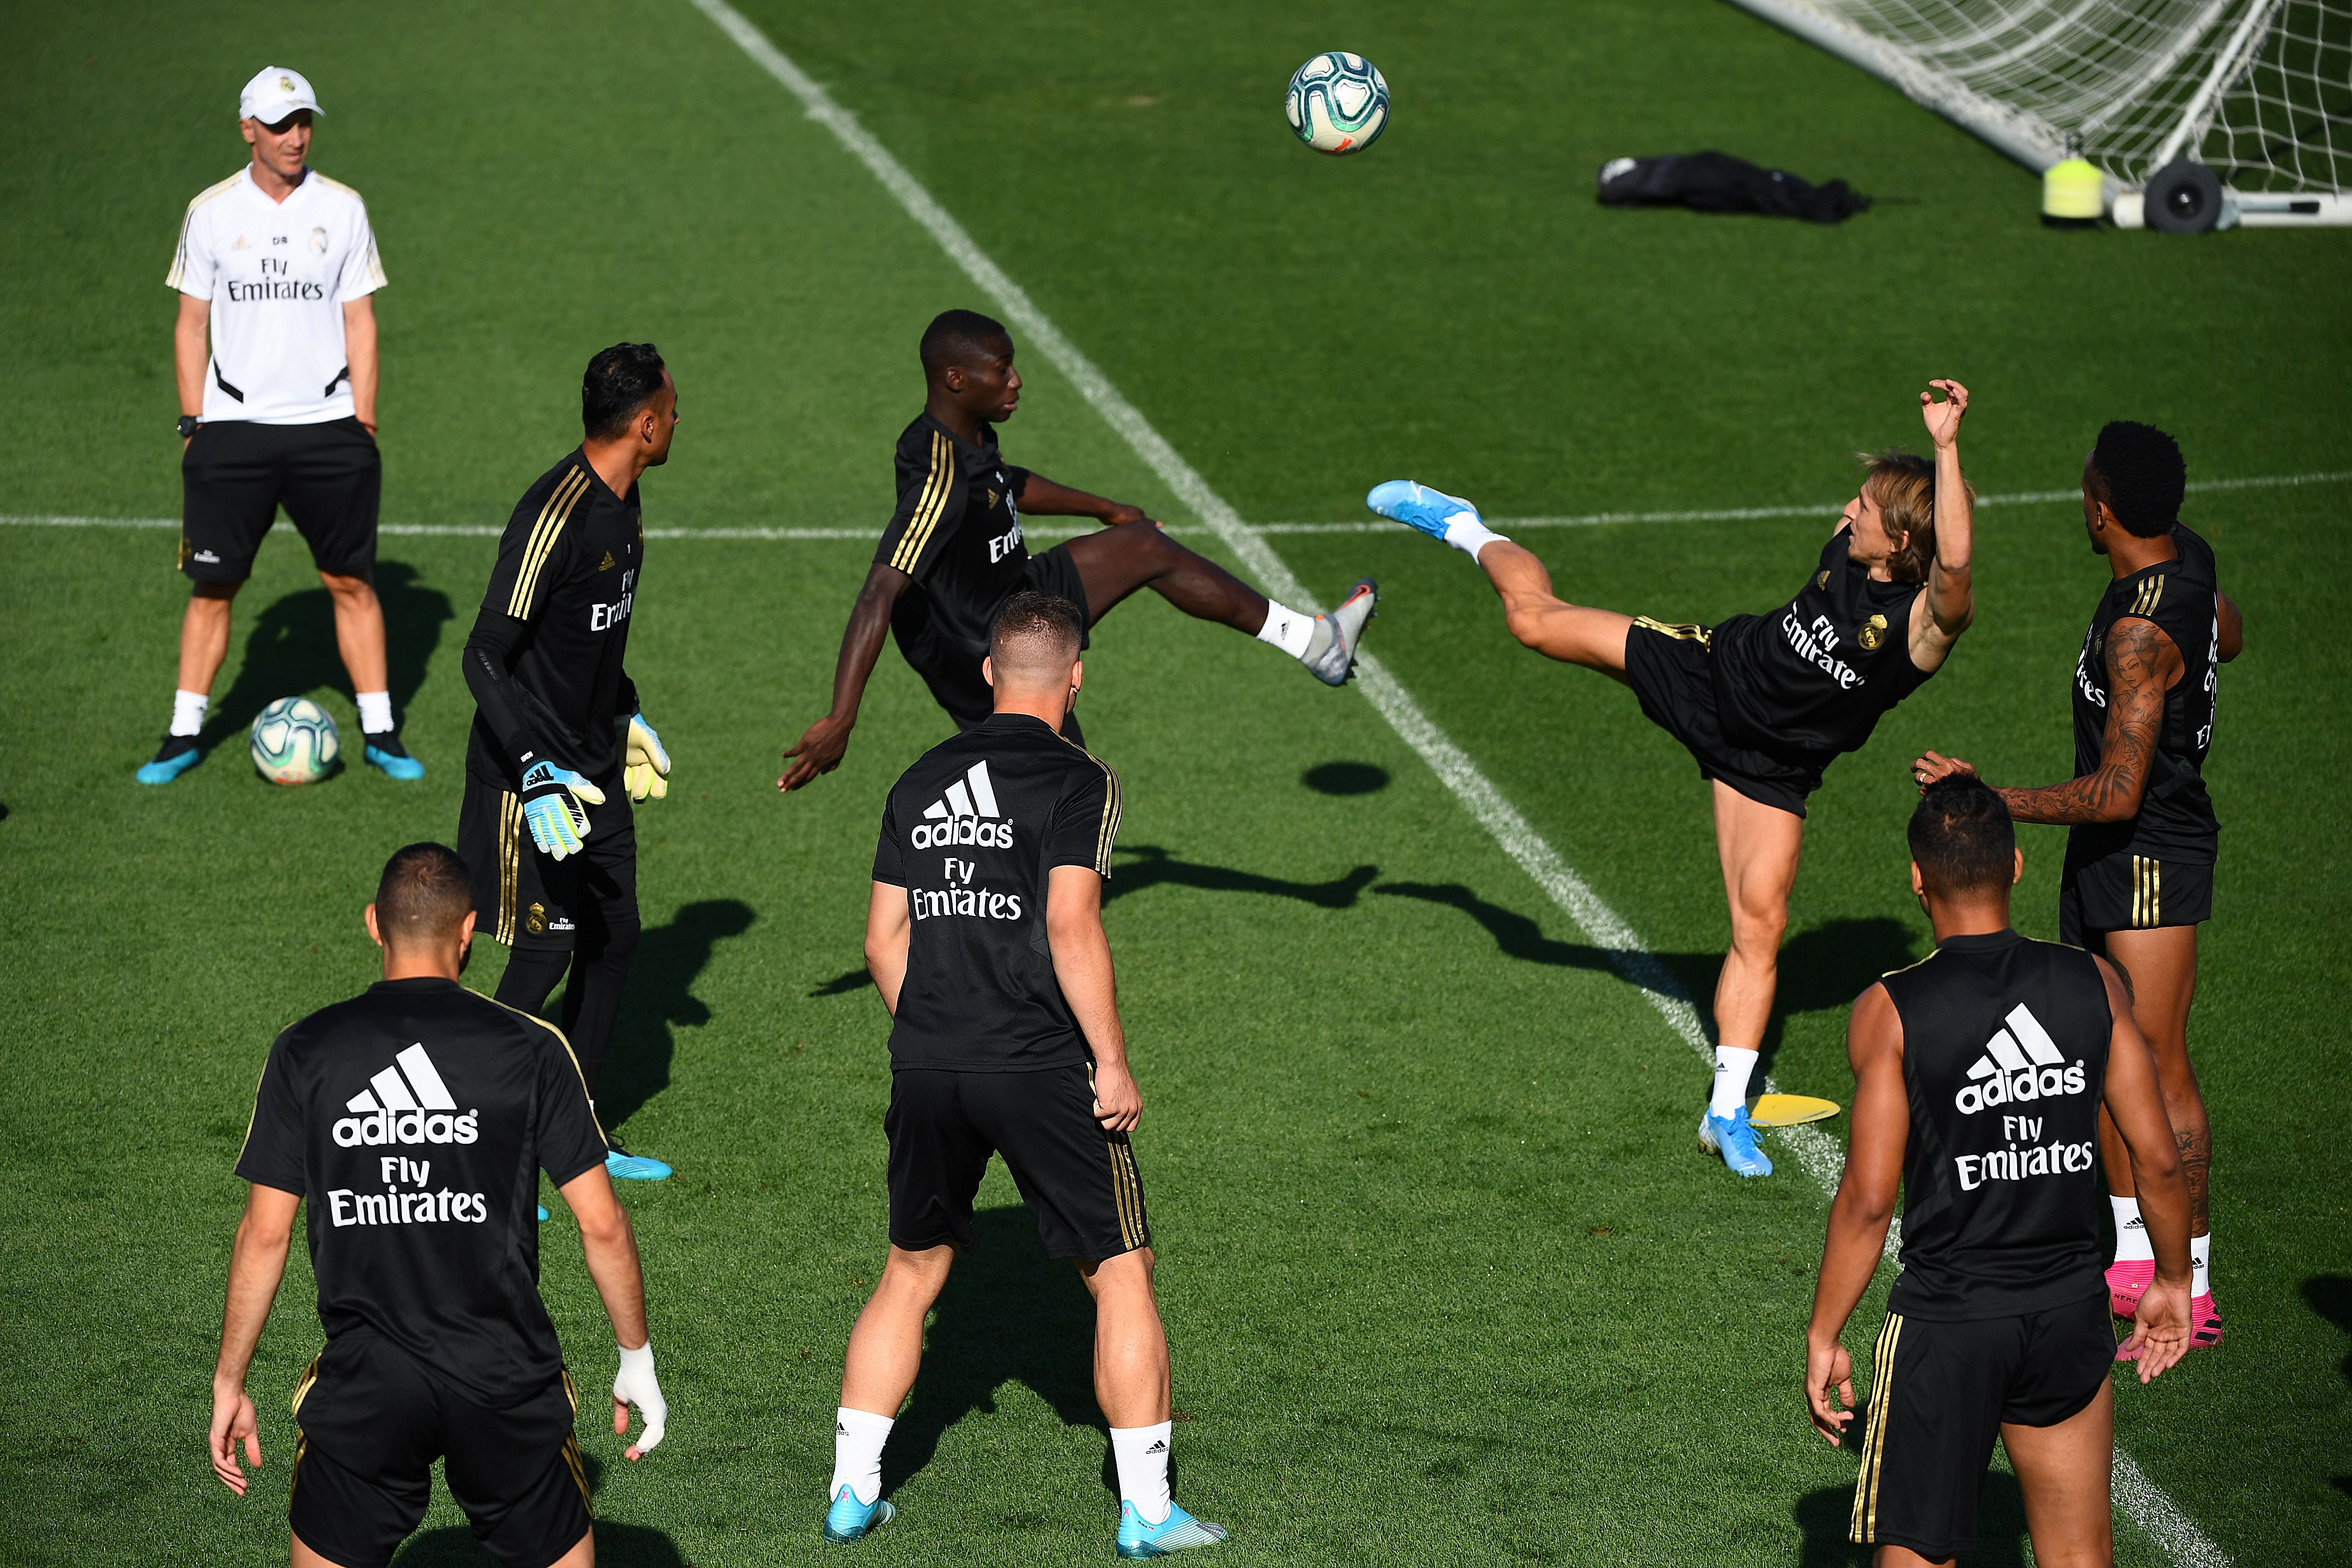 Real Madrid's players take part in a training session at the Ciudad Real Madrid training ground in Valdebebas near Madrid on August 23, 2019 ahead of their Spanish League football match against Real Valladolid. (Photo by GABRIEL BOUYS / AFP)        (Photo credit should read GABRIEL BOUYS/AFP/Getty Images)